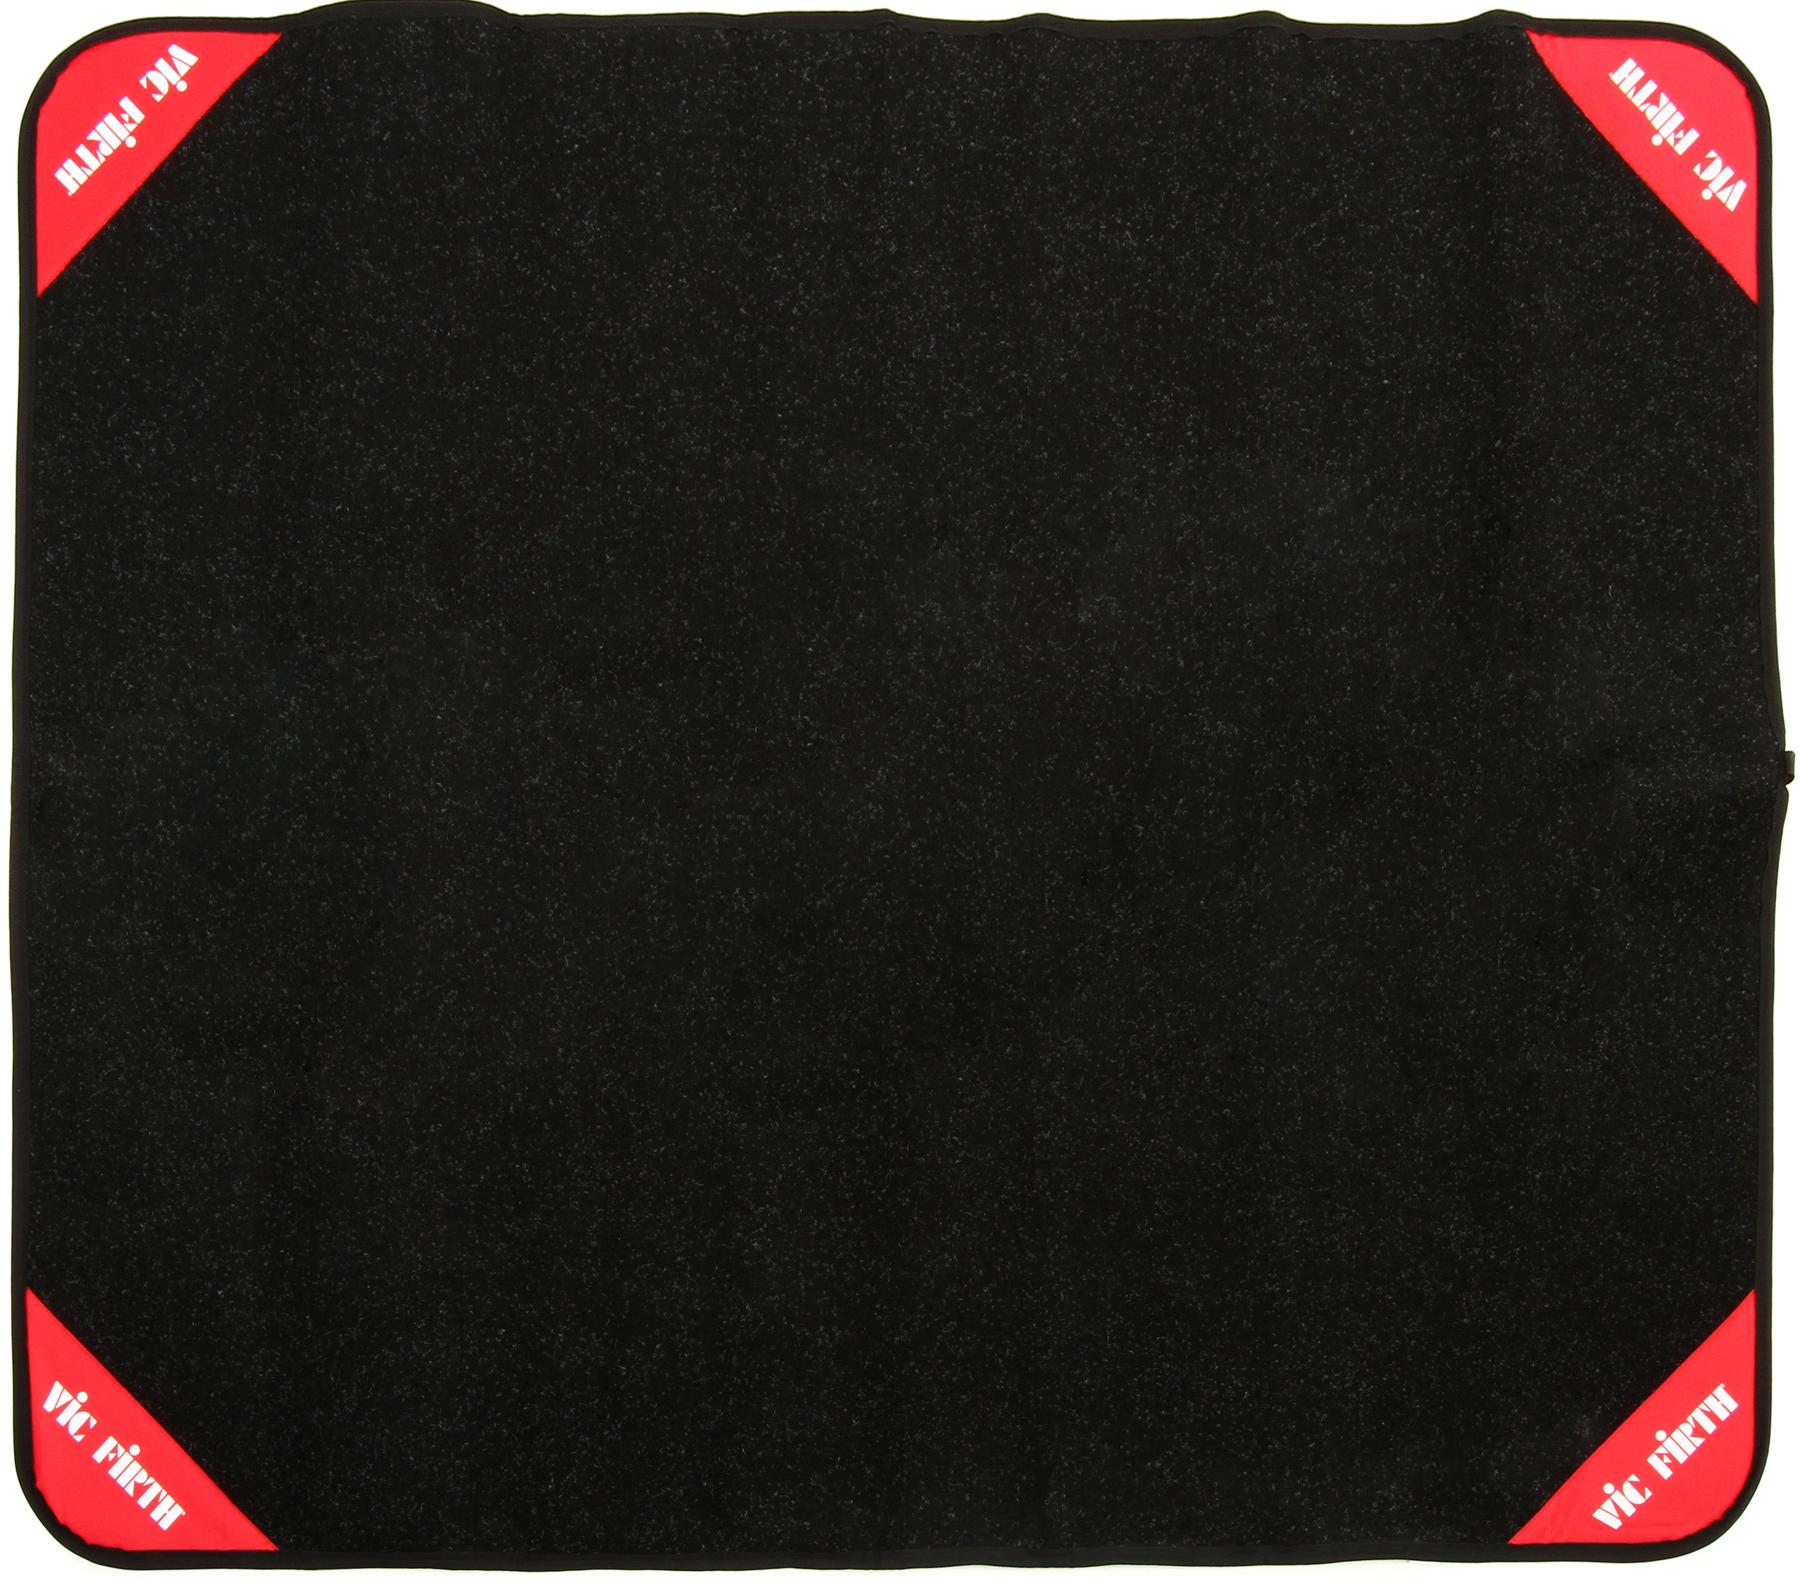 7. Vic Firth Deluxe Drum Set Rug (VICRUG1)